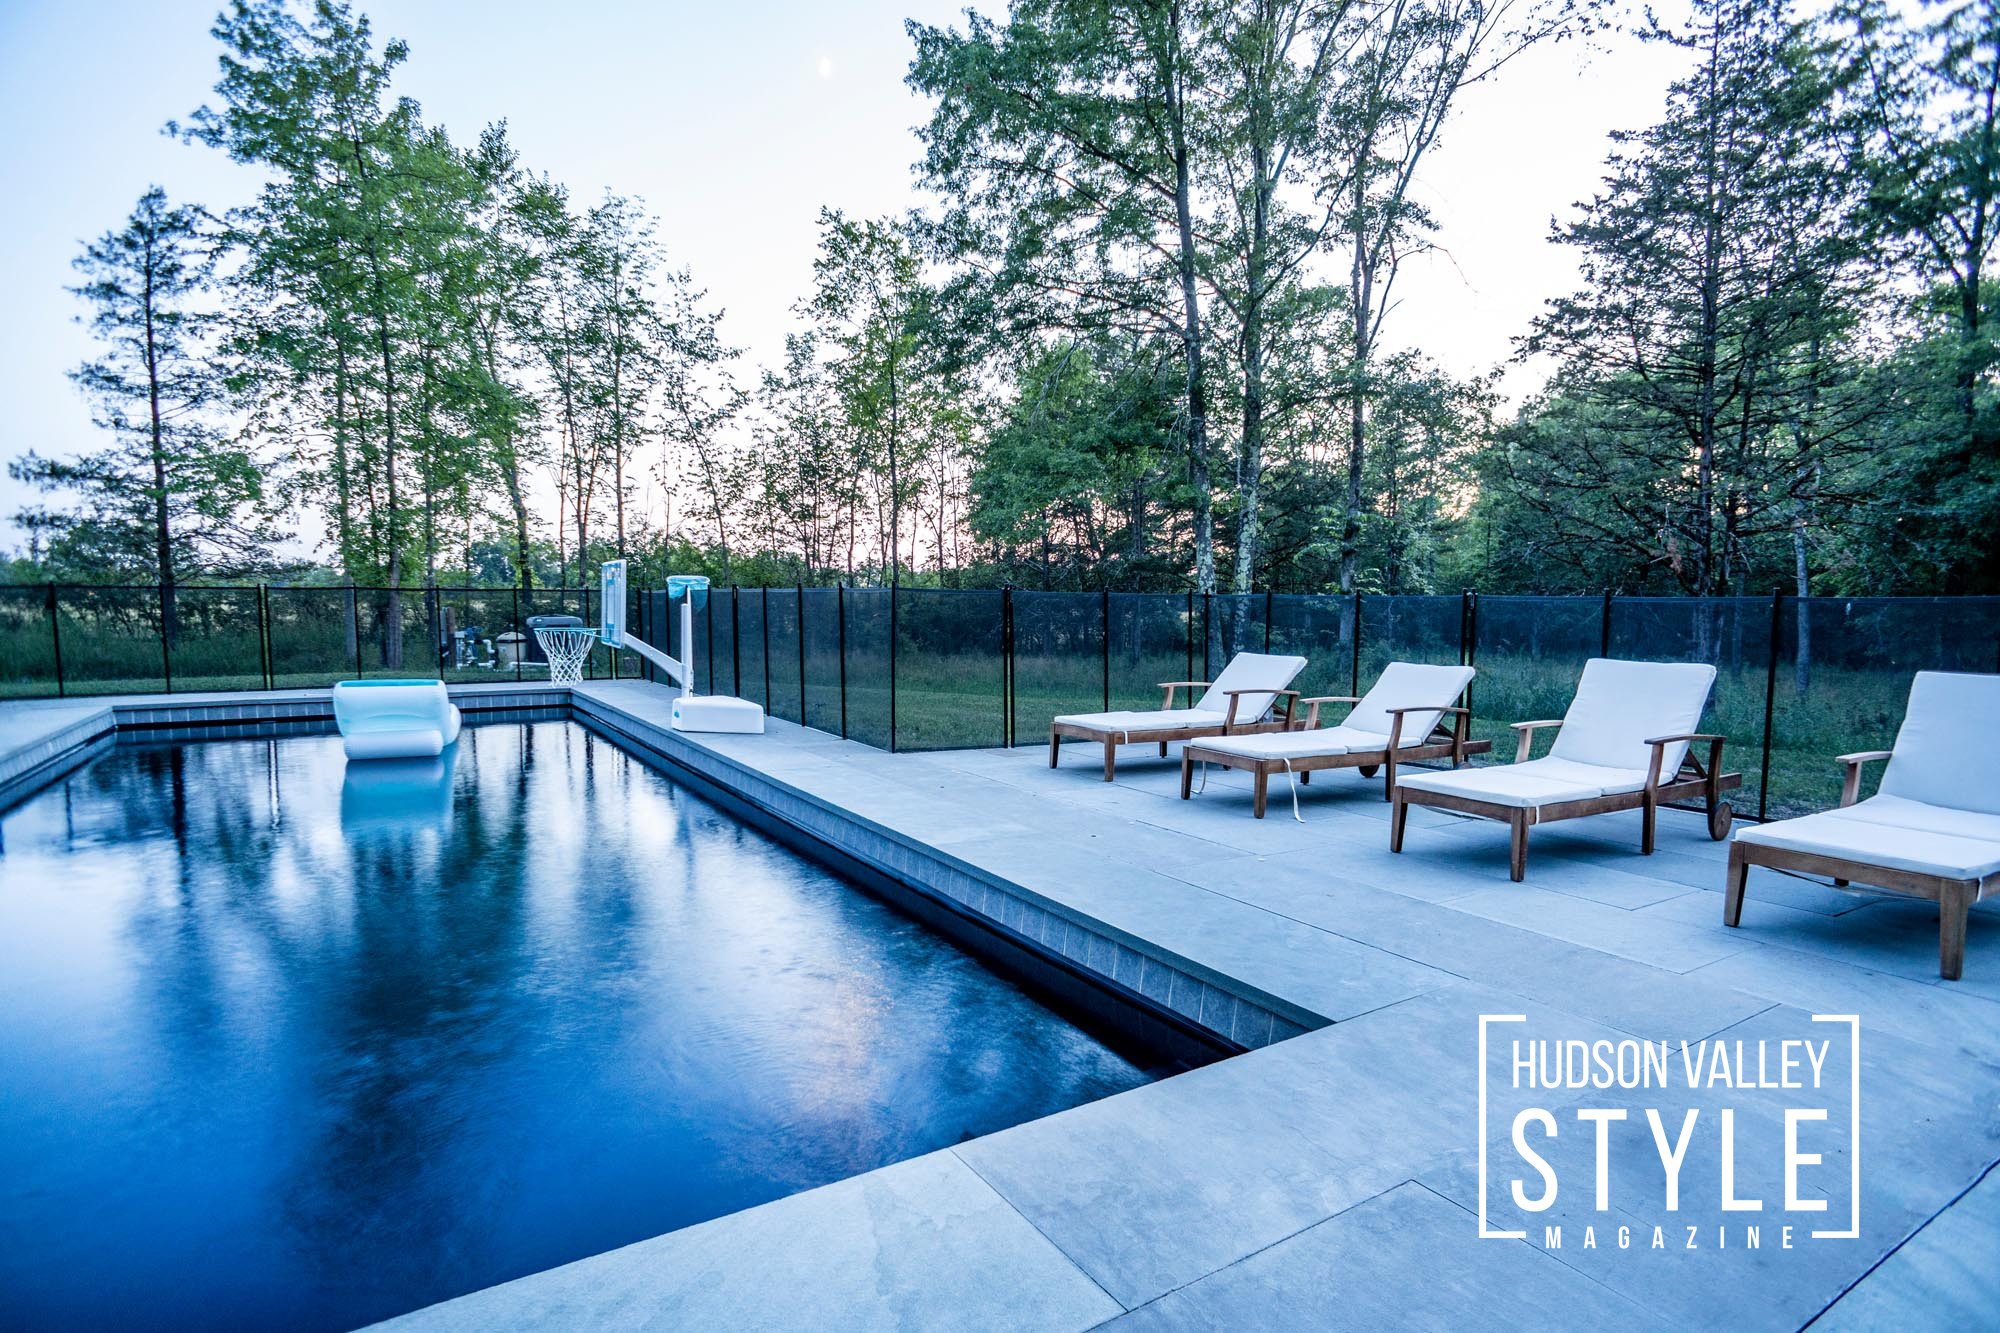 Rejuvenate in Hudson Valley: A Sanctuary of Wellness at Alluvion Vacations' Luxury Airbnb Villa with Saltwater Pool – Presented by Alluvion Vacations